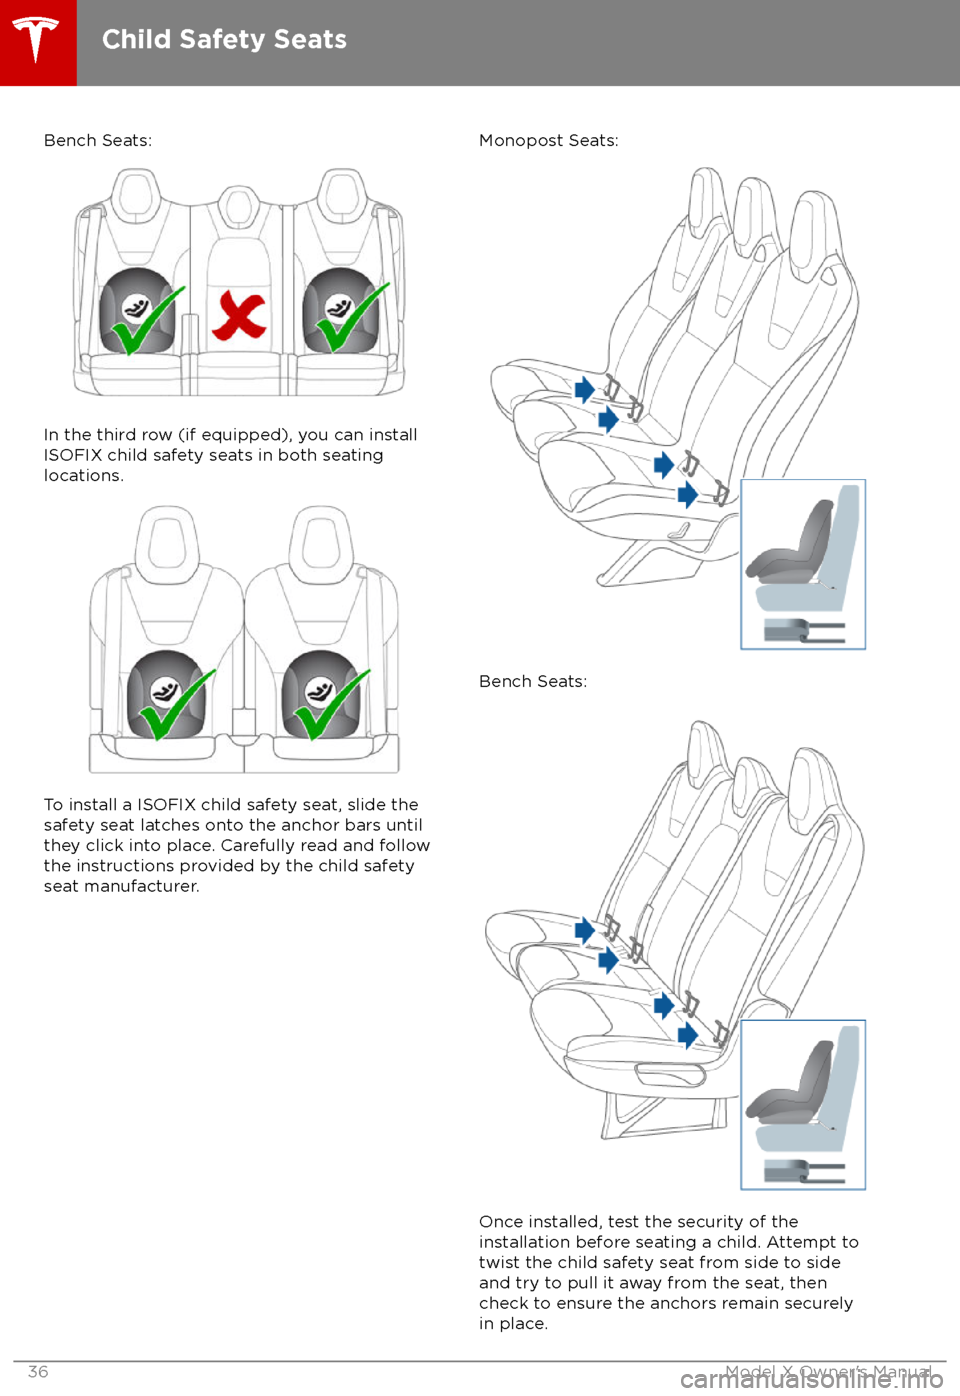 TESLA MODEL X 2018  Owners Manual  Bench Seats:
In the third row (if equipped), you can install
ISOFIX child safety seats in both seating
locations.
To install a ISOFIX child safety seat, slide the
safety seat latches onto the anchor b